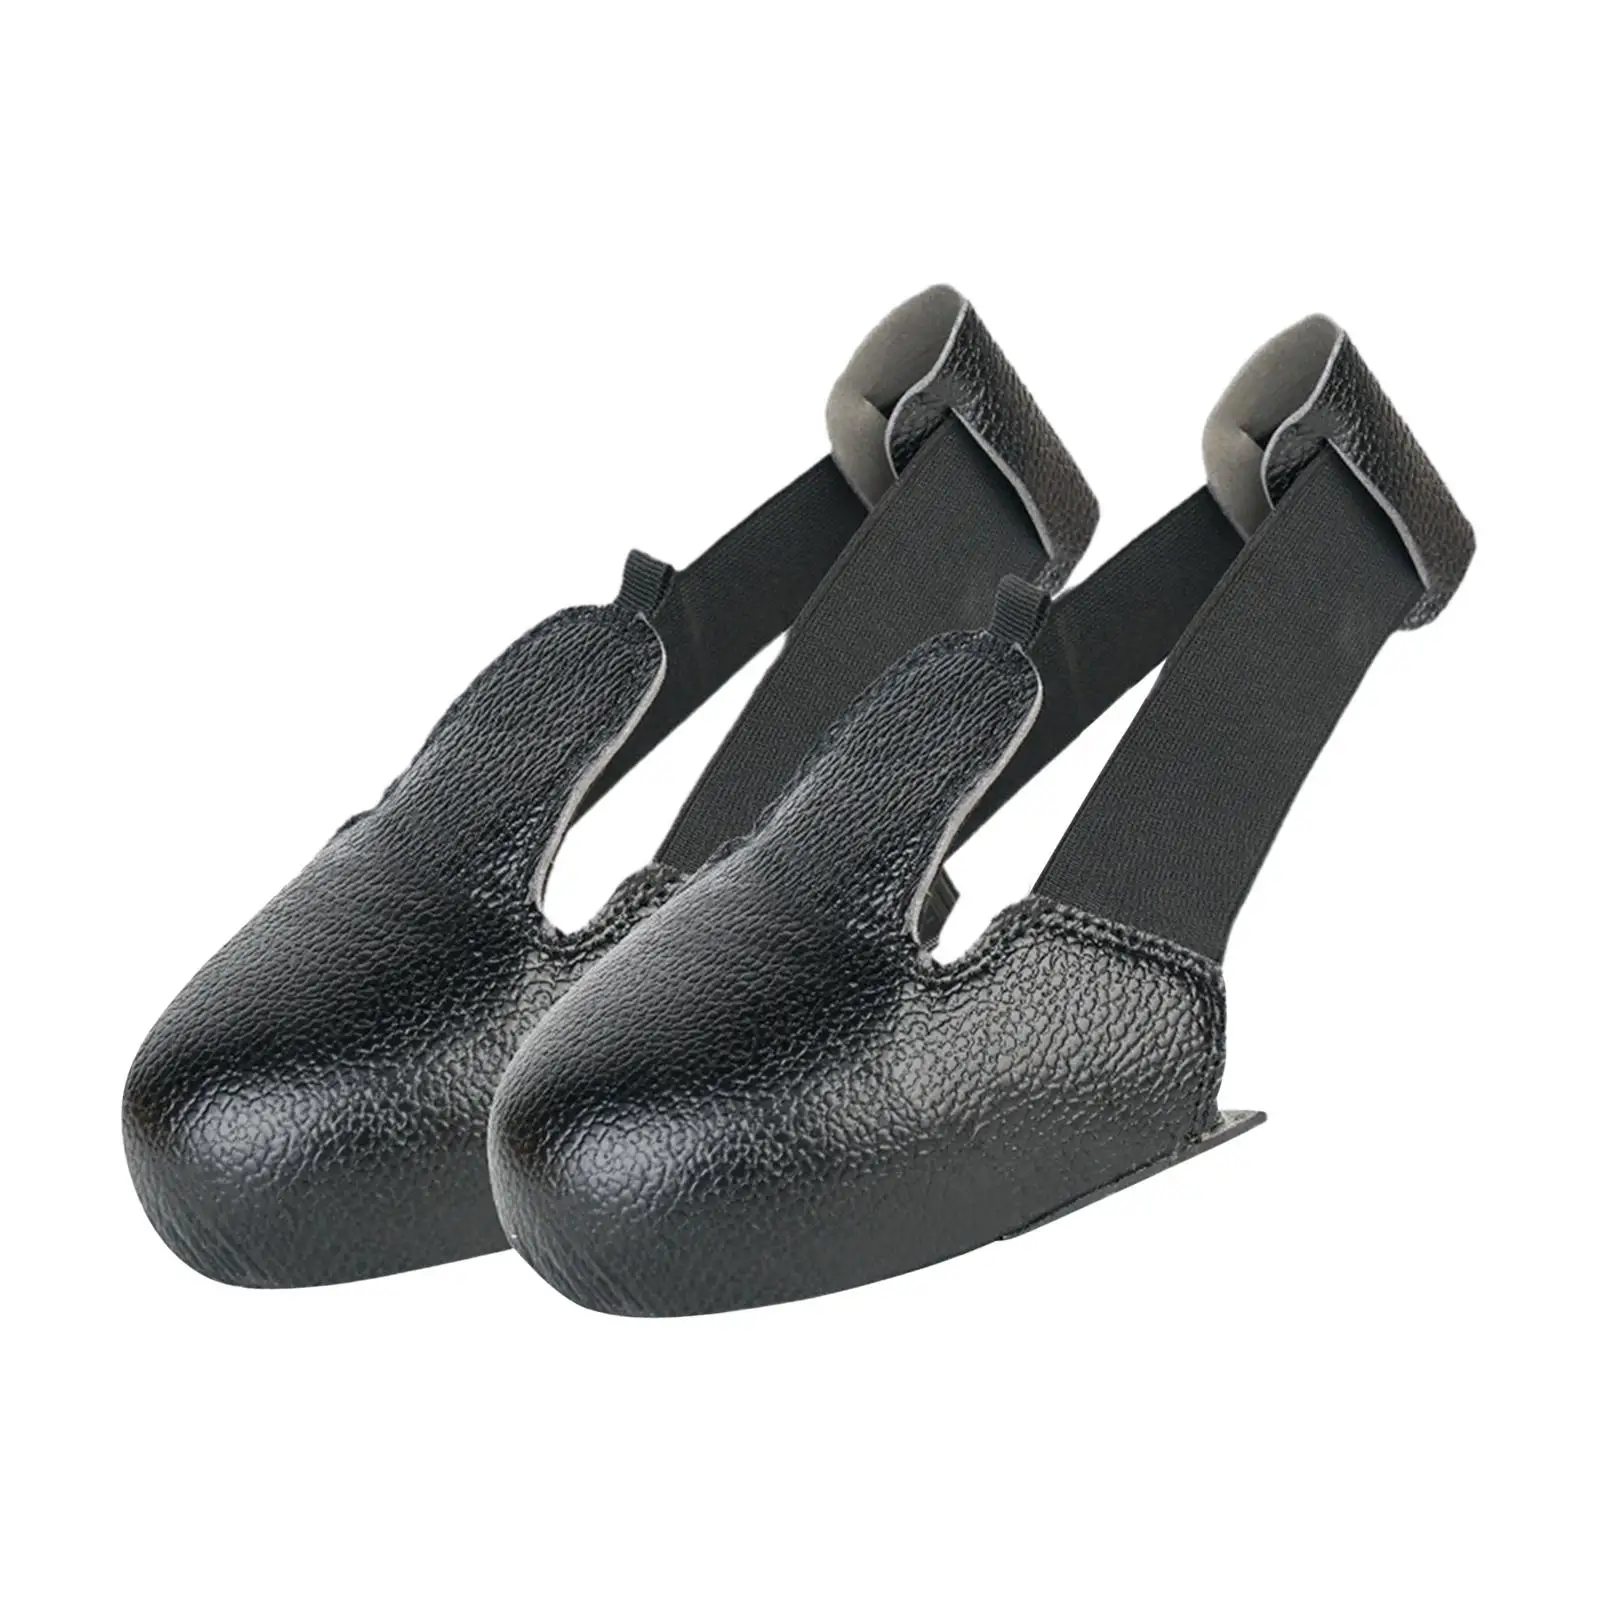 Stretch Leather Overshoes Toe Cap Safety Shoe Caps Universal Leather Shoes Covers Overshoes Accessories